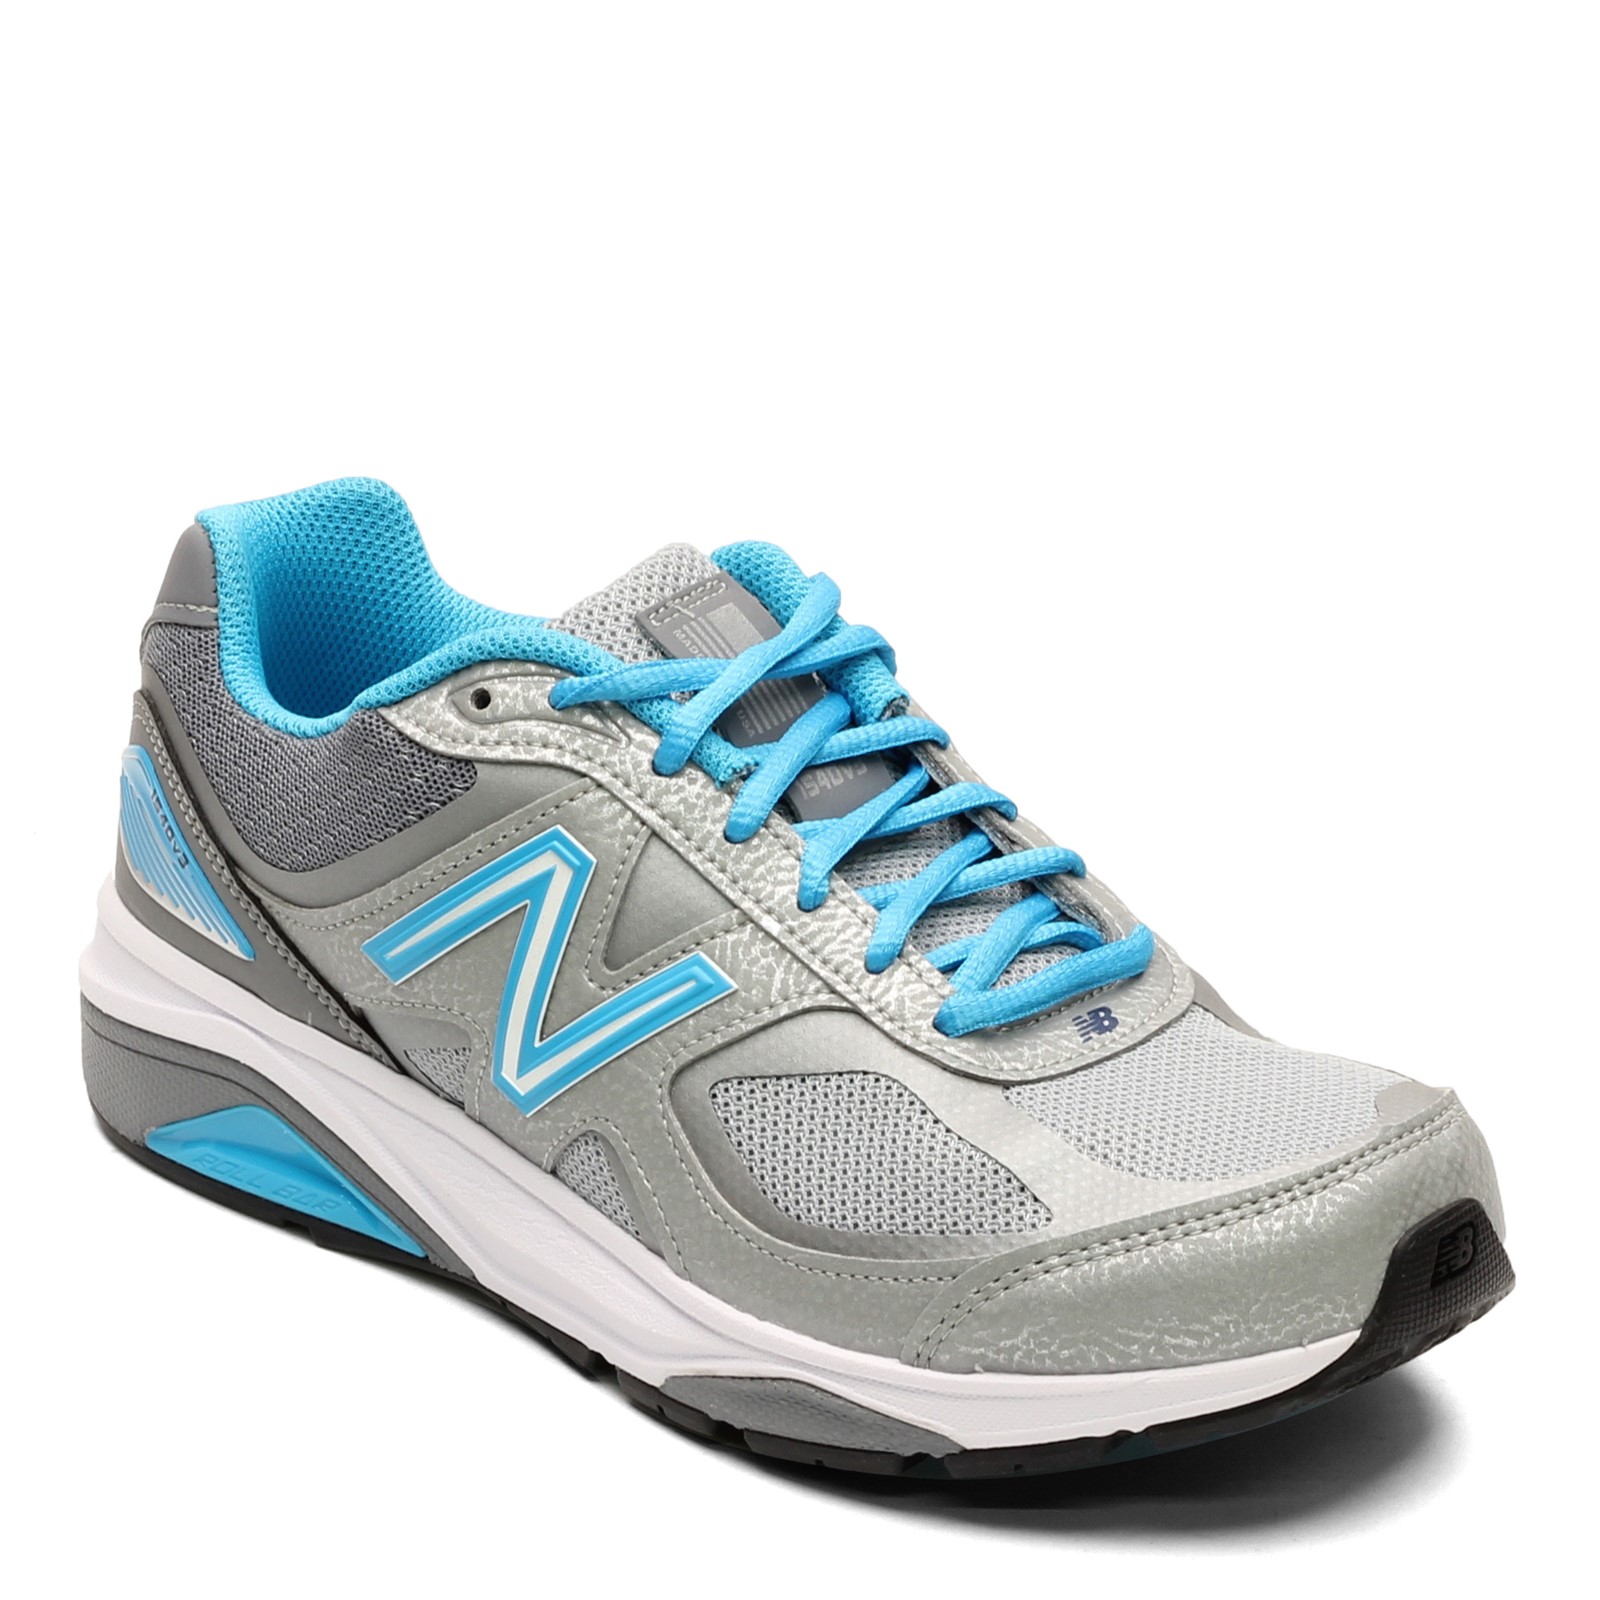 New Balance 1540v3 - Country Foot Care